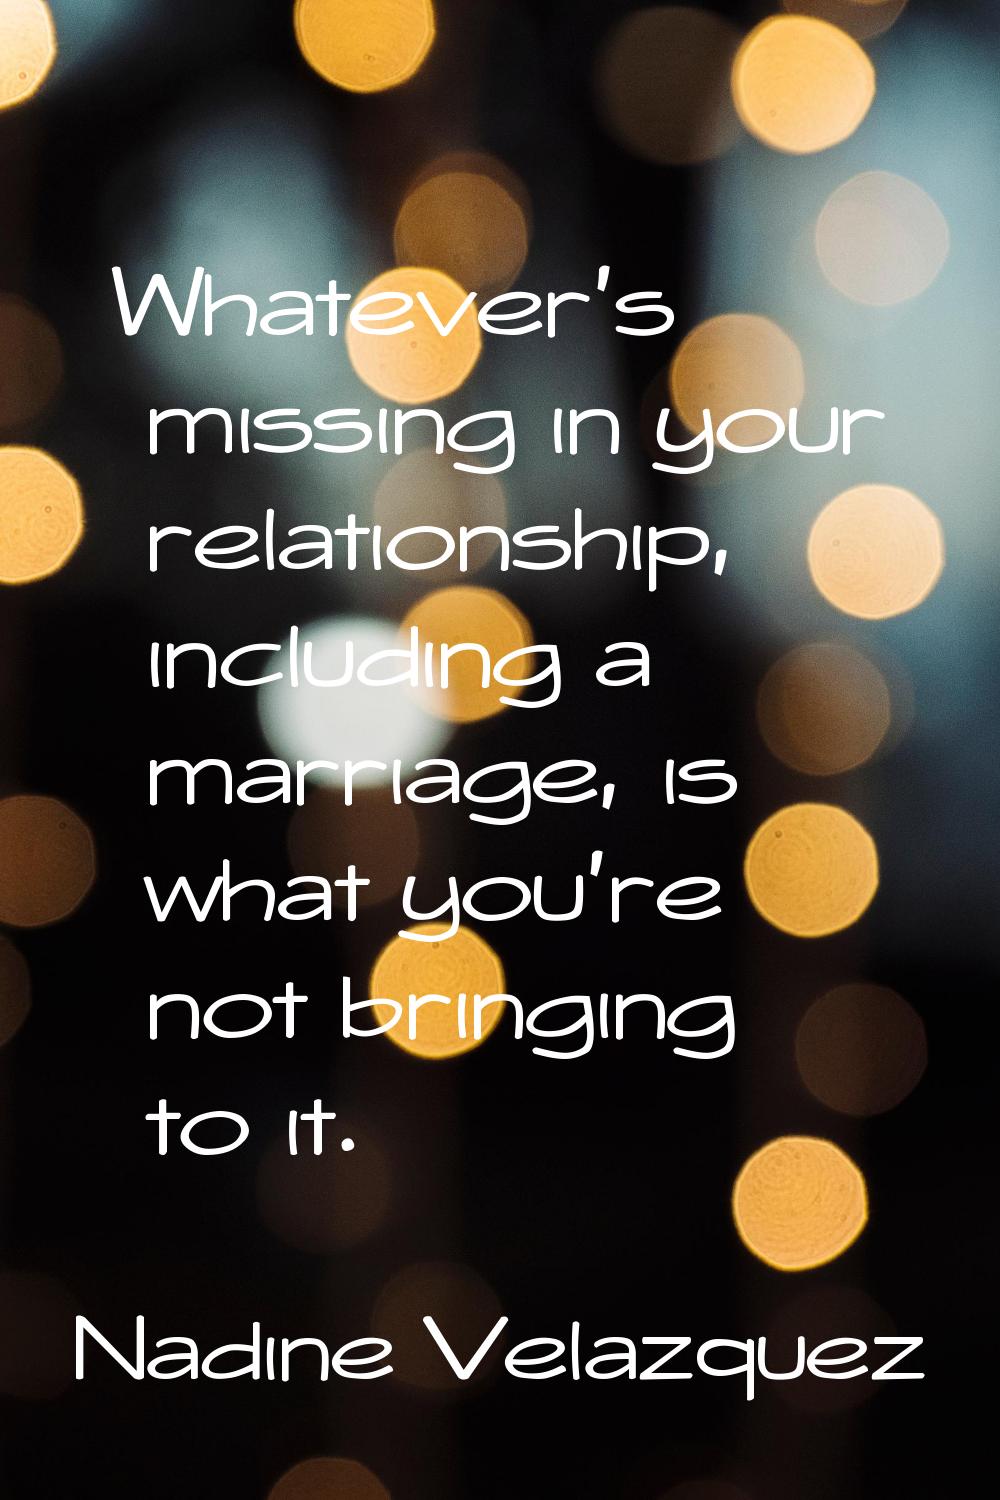 Whatever's missing in your relationship, including a marriage, is what you're not bringing to it.